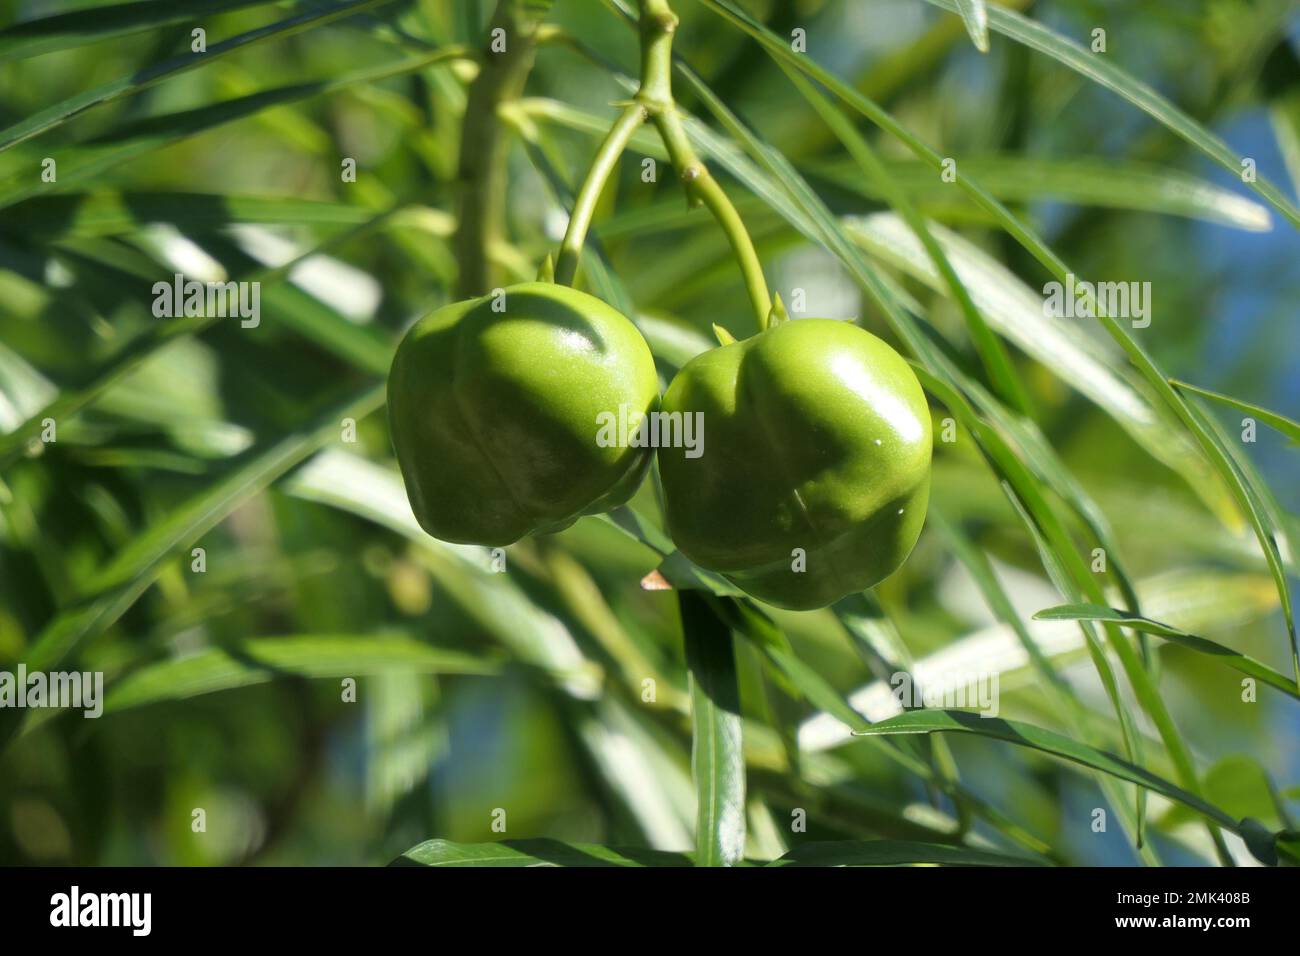 Unripe fruits of yellow oleander containing toxic seeds Stock Photo